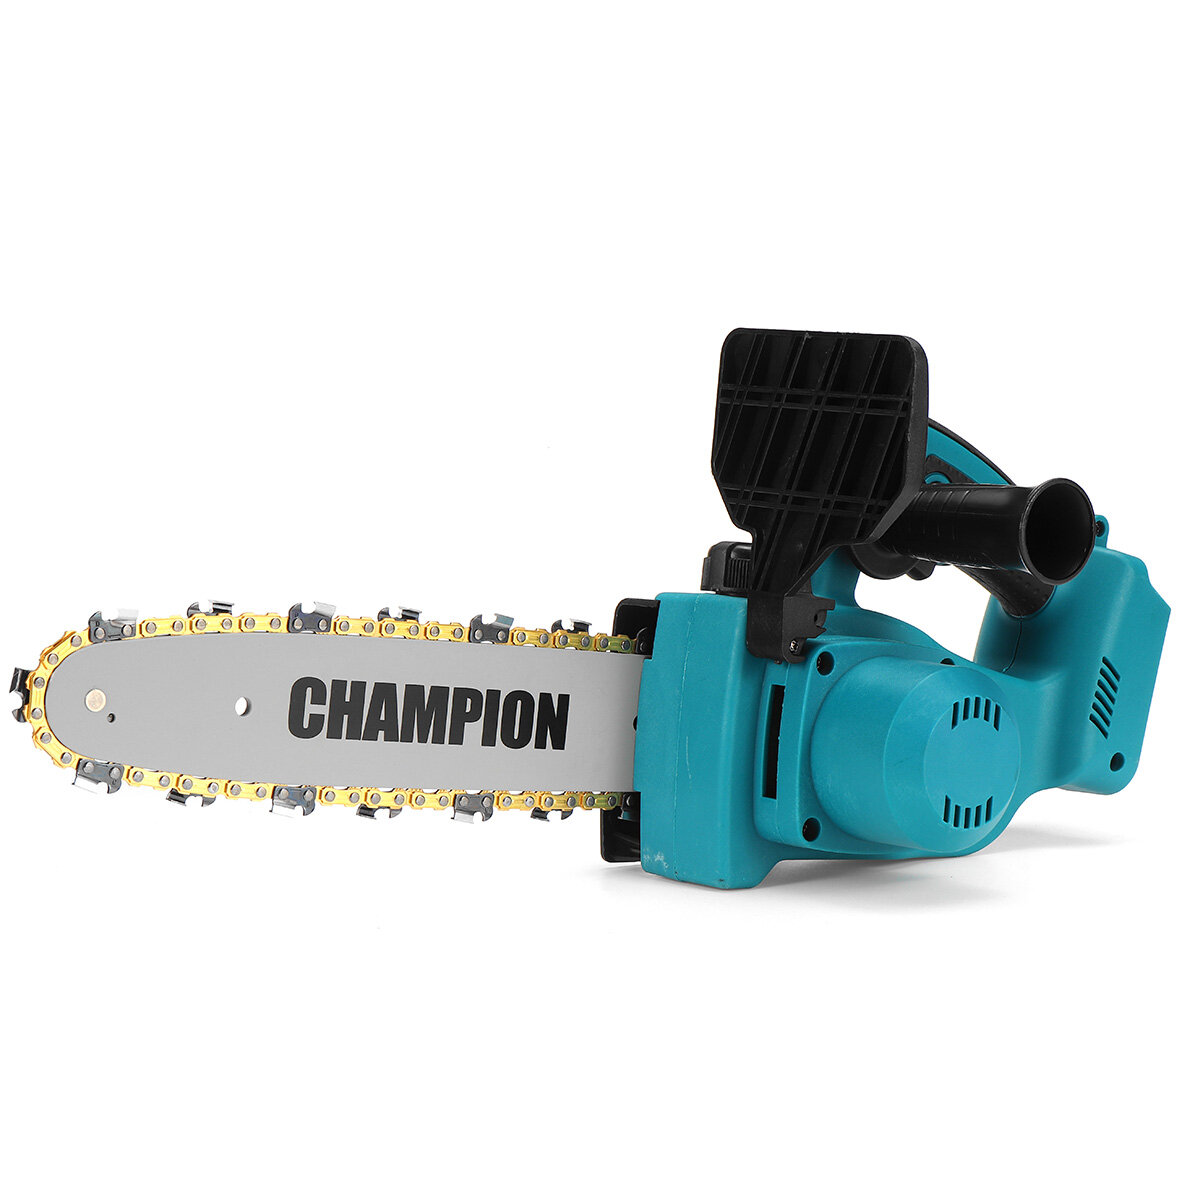 Drillpro 10Inch Cordless Brushless Electric Chain Saw Woodworking Wood Cutter For Makita Battery W/ 